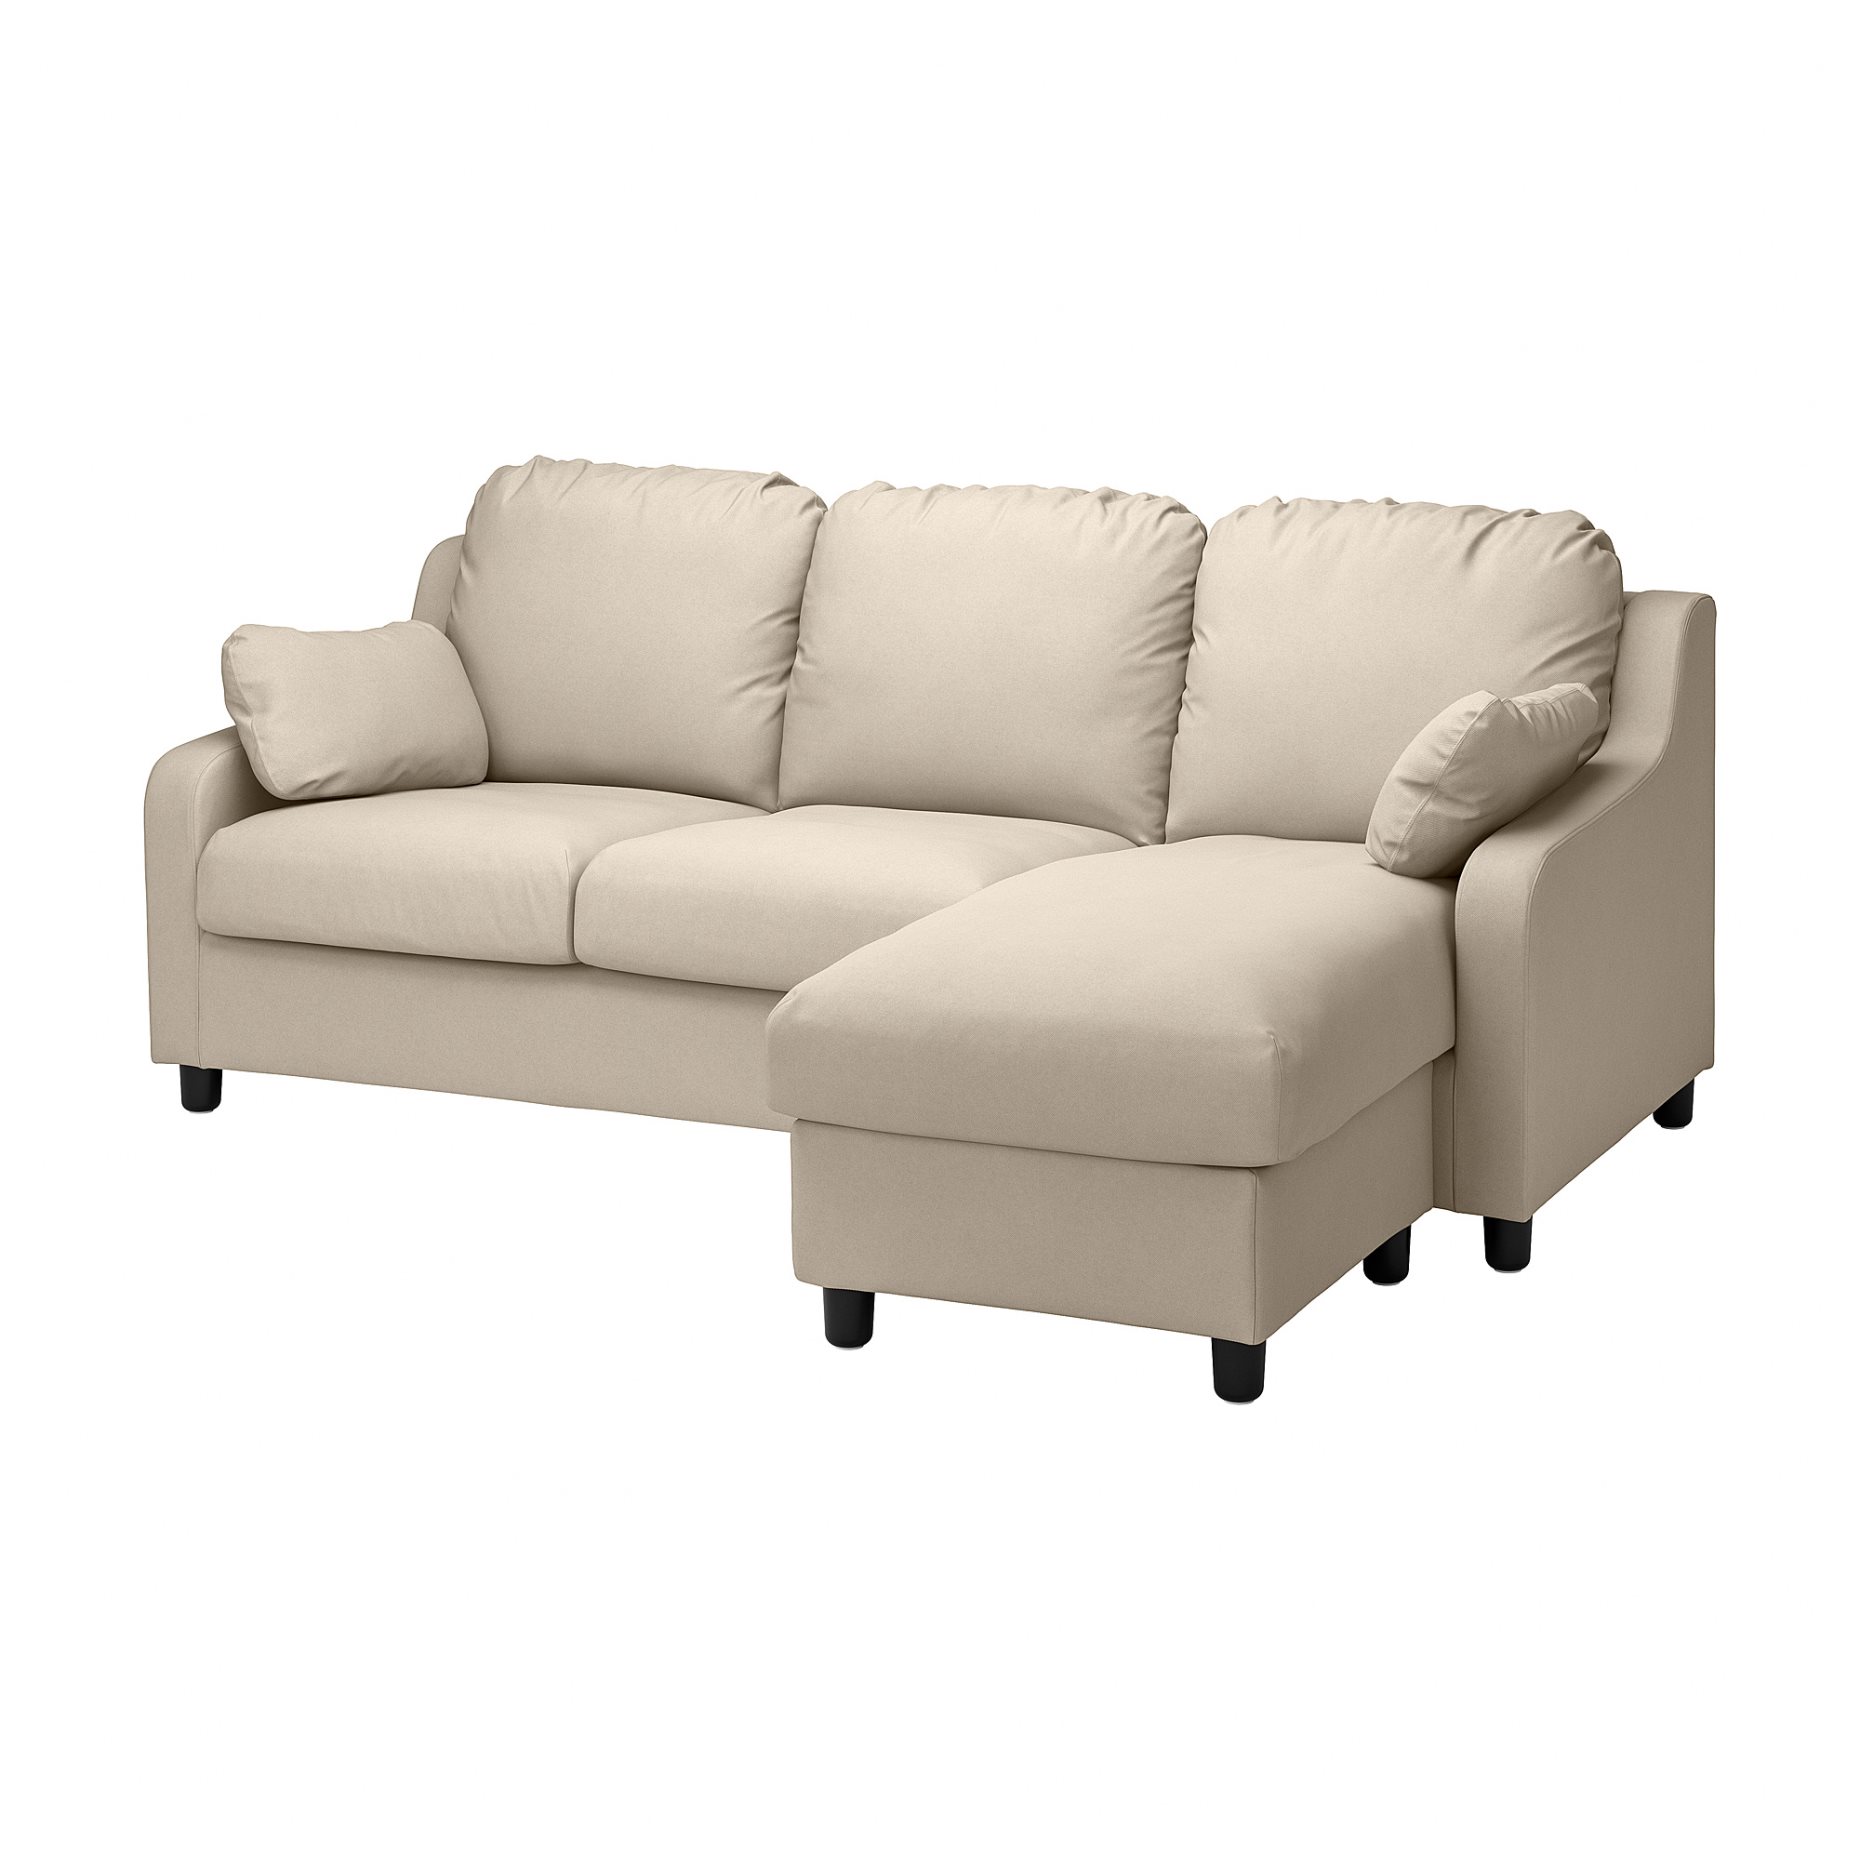 VINLIDEN, cover for 3-seat sofa with chaise longue, 504.437.69